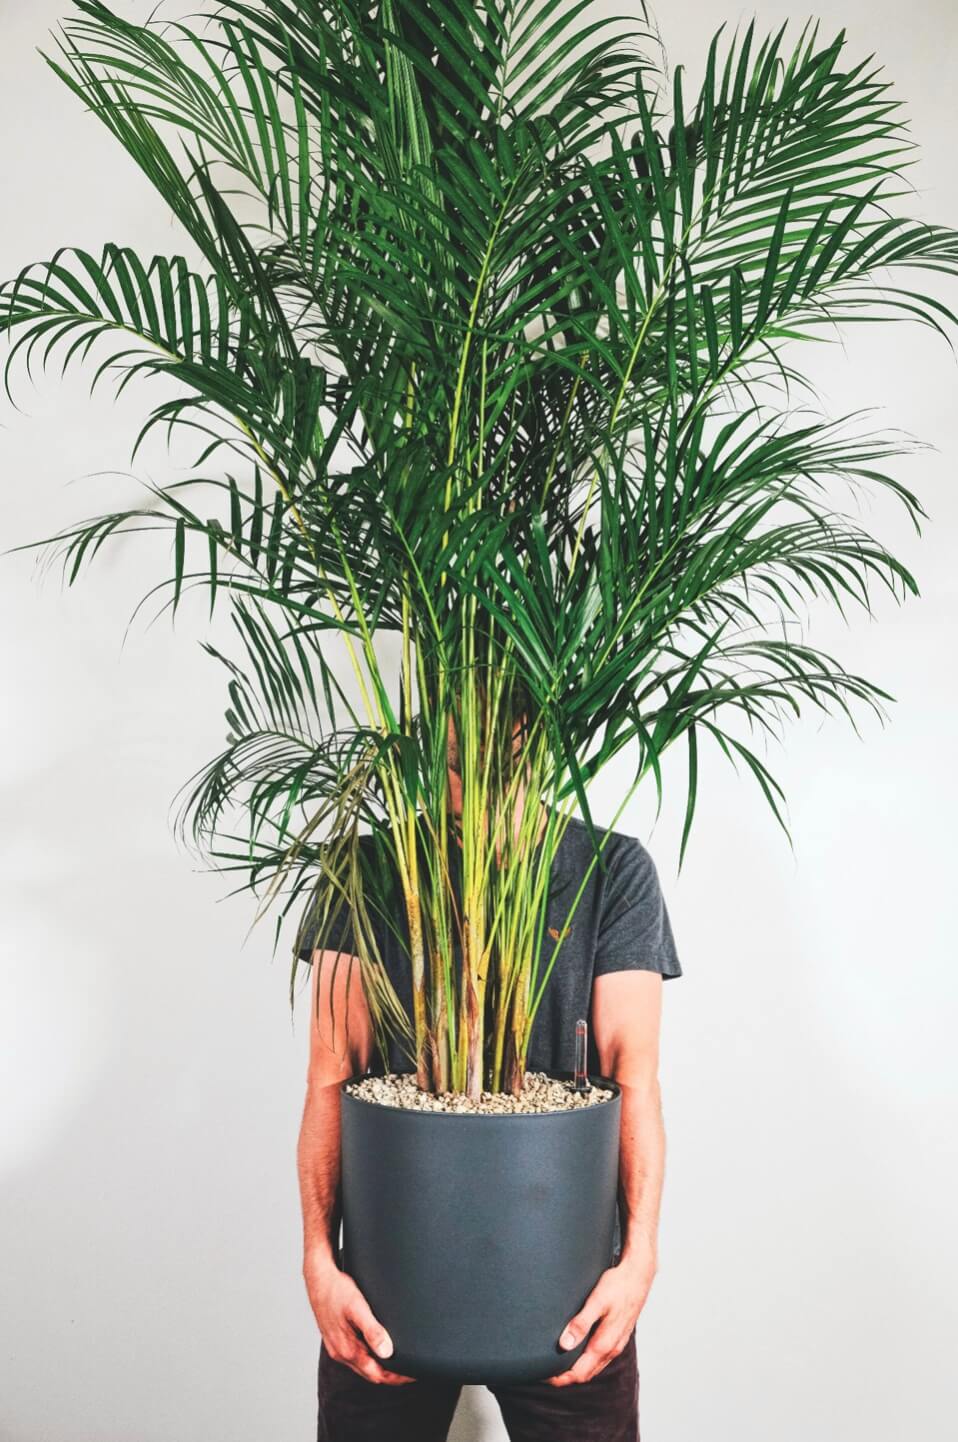 Man holding a tall palm tree in a pot